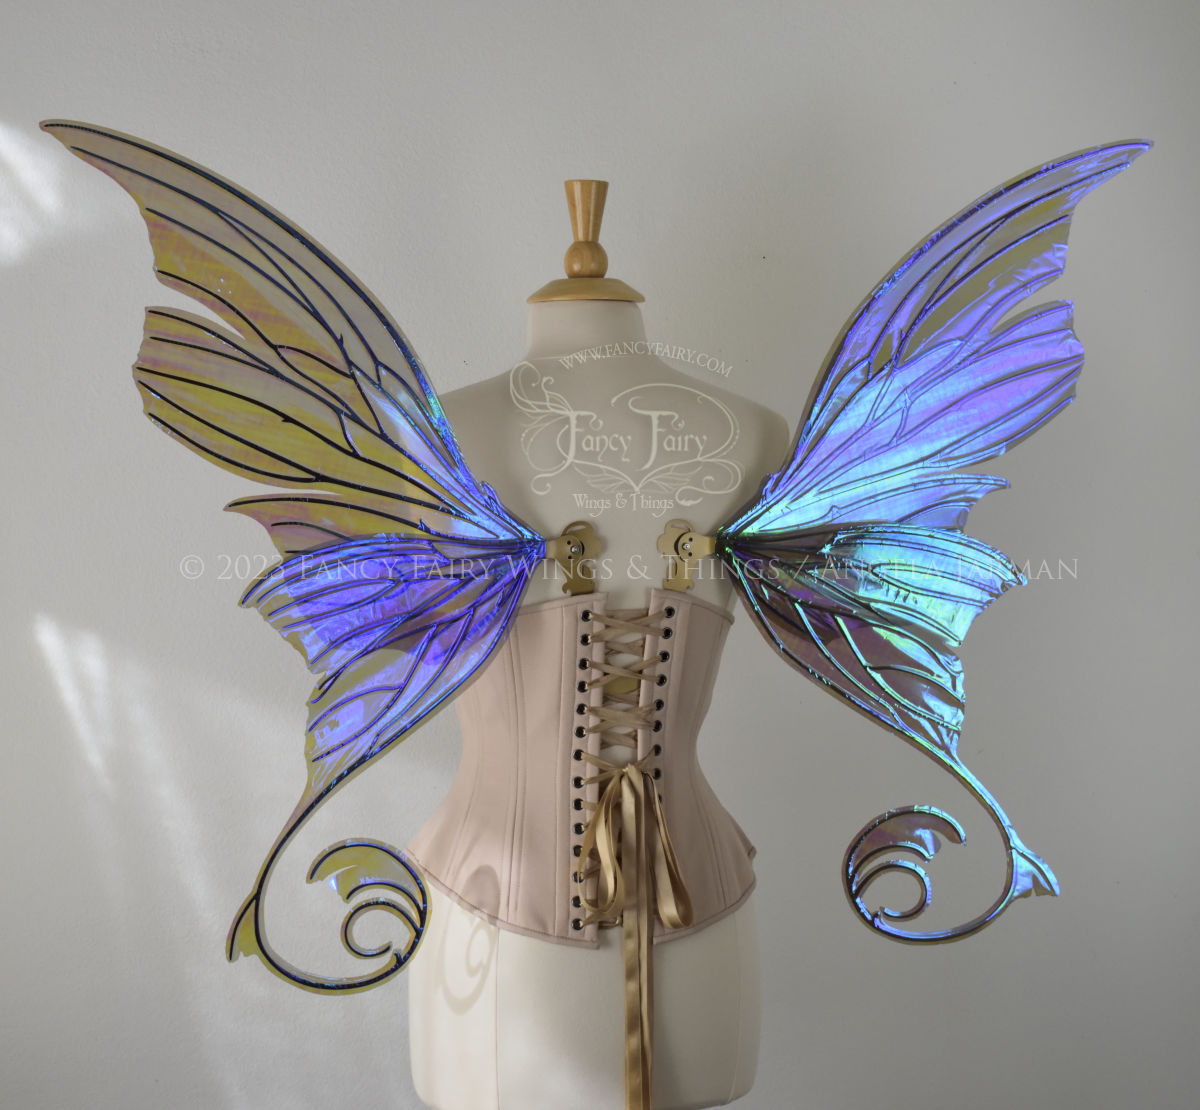 Back view of an ivory dress form wearing an alabaster underbust corset and large purple iridescent fairy wings with lots of intricate gold veins, some have 'thorns'. Upper panels curve slightly downwards along top edge with pointy tips, bottom panels have tails